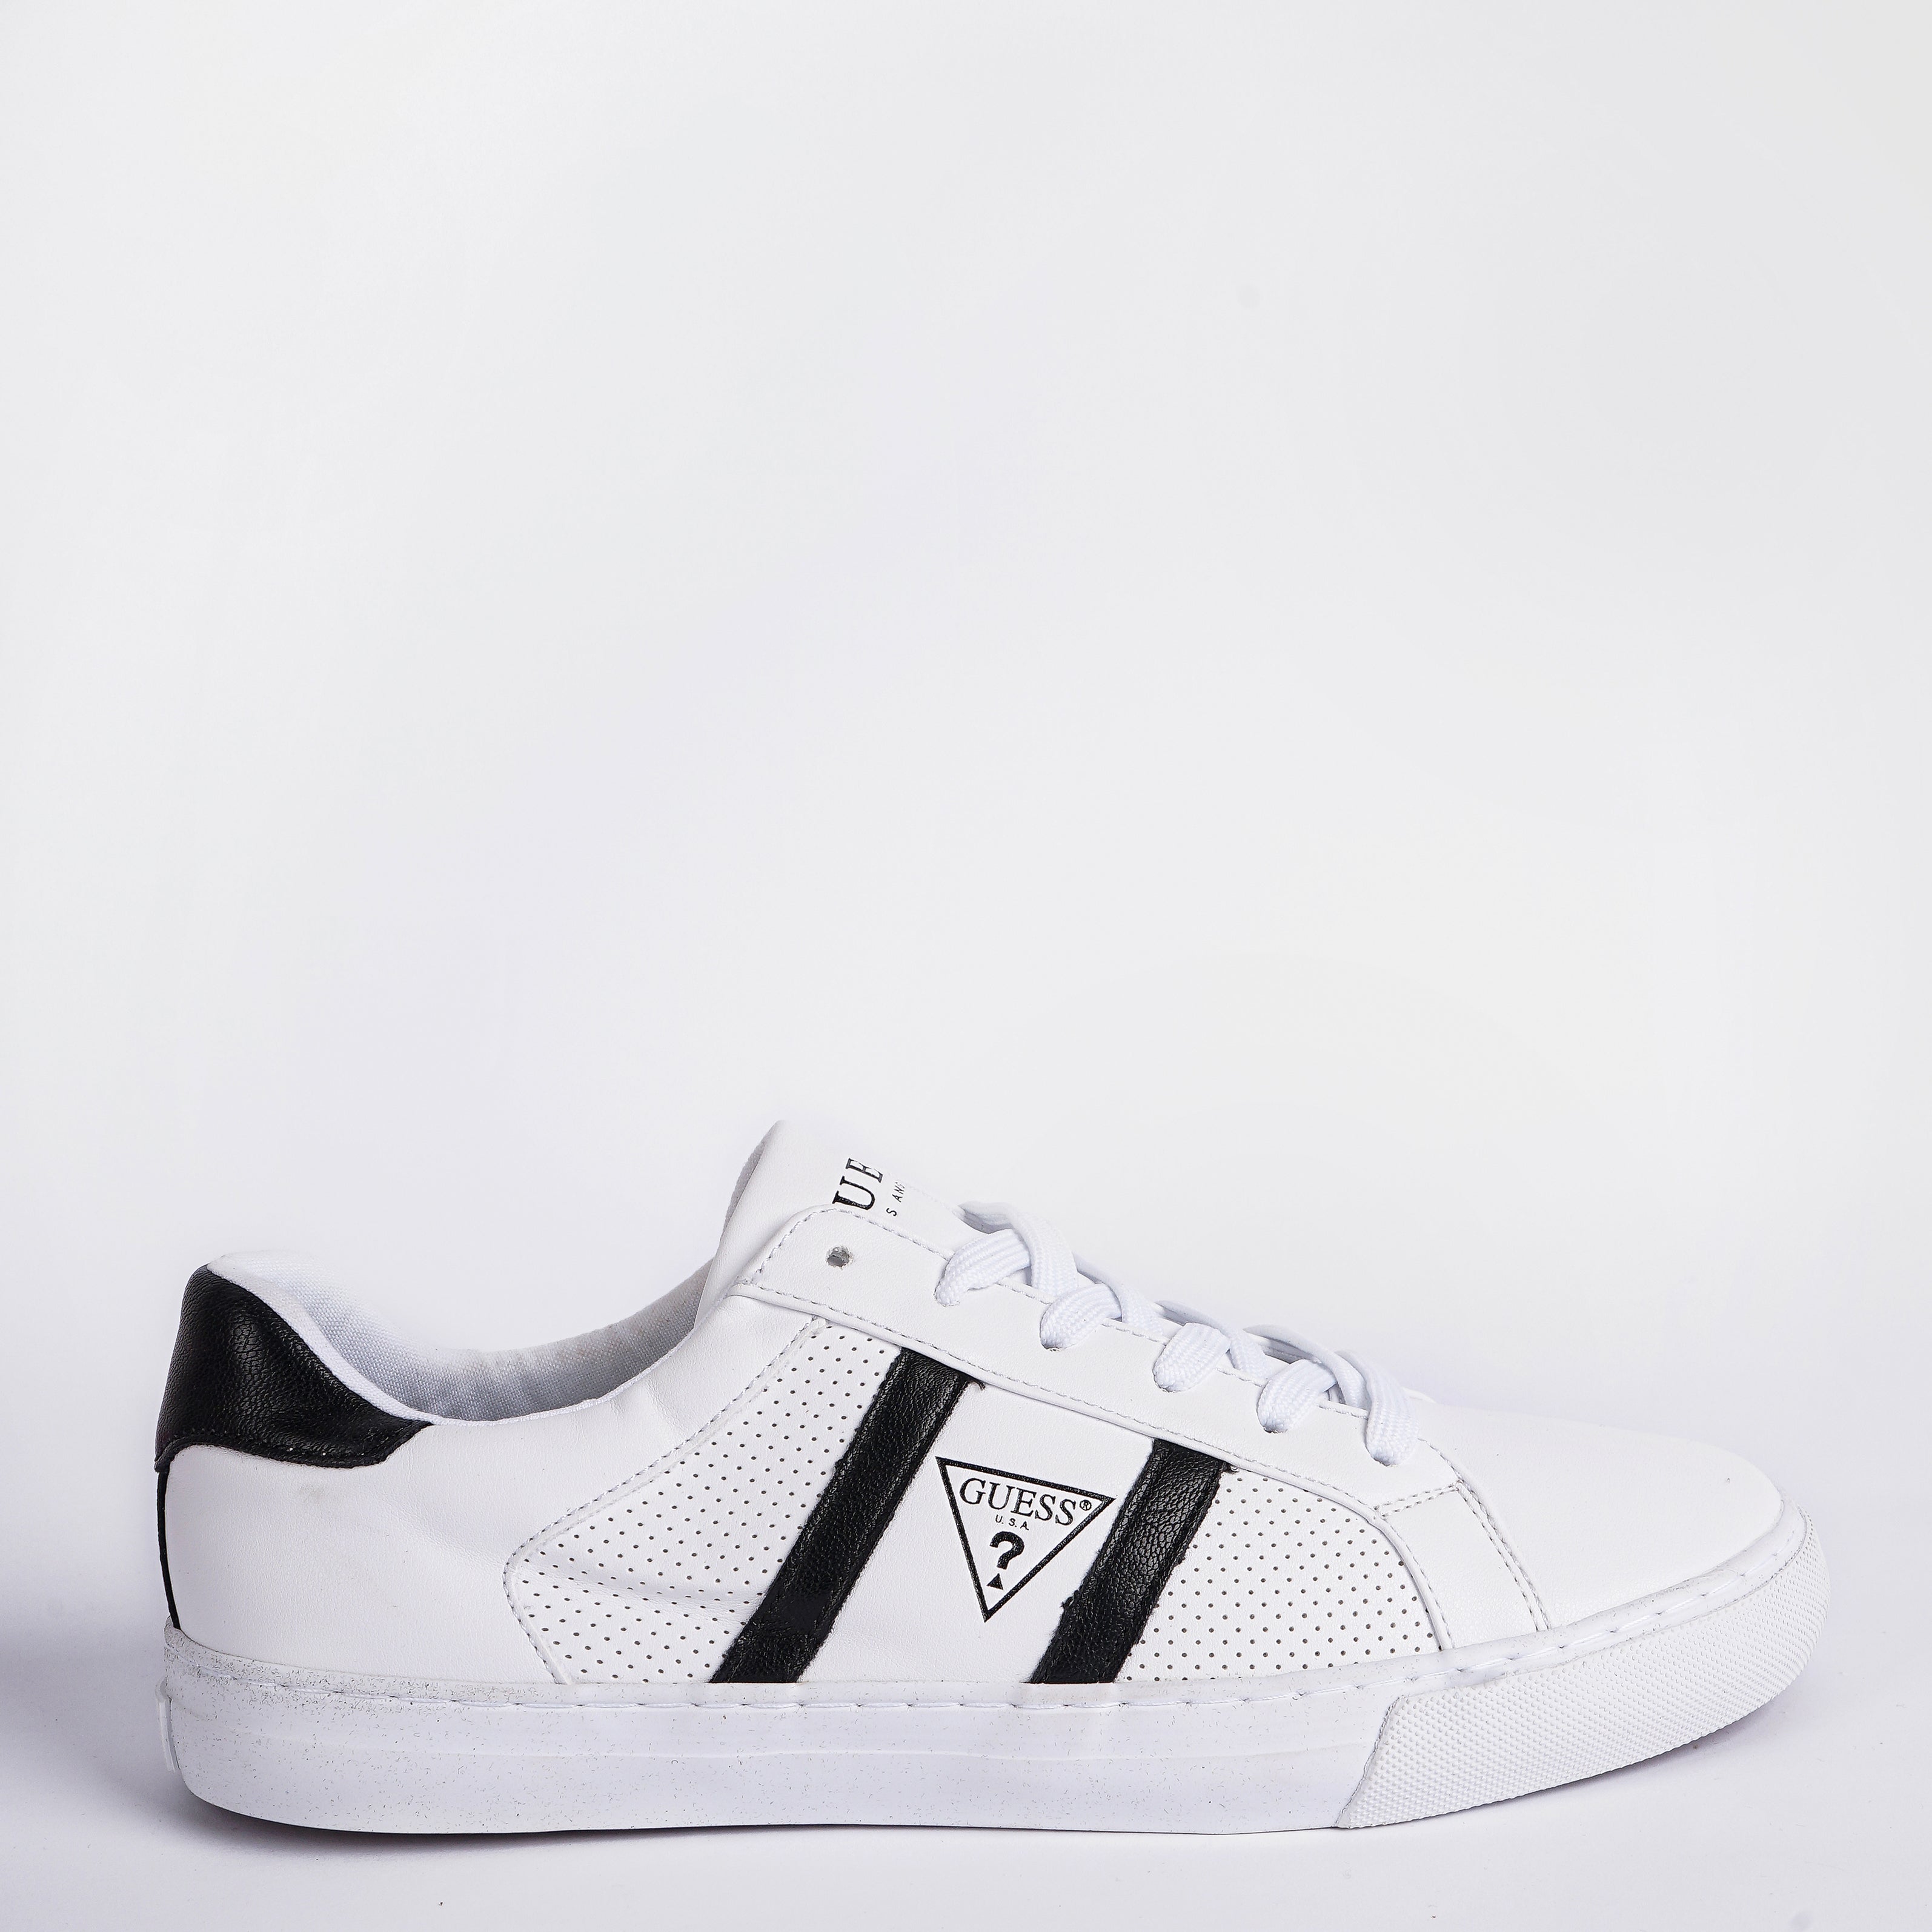 GUESS Men's Sneaker in White - Marca Deals - Guess